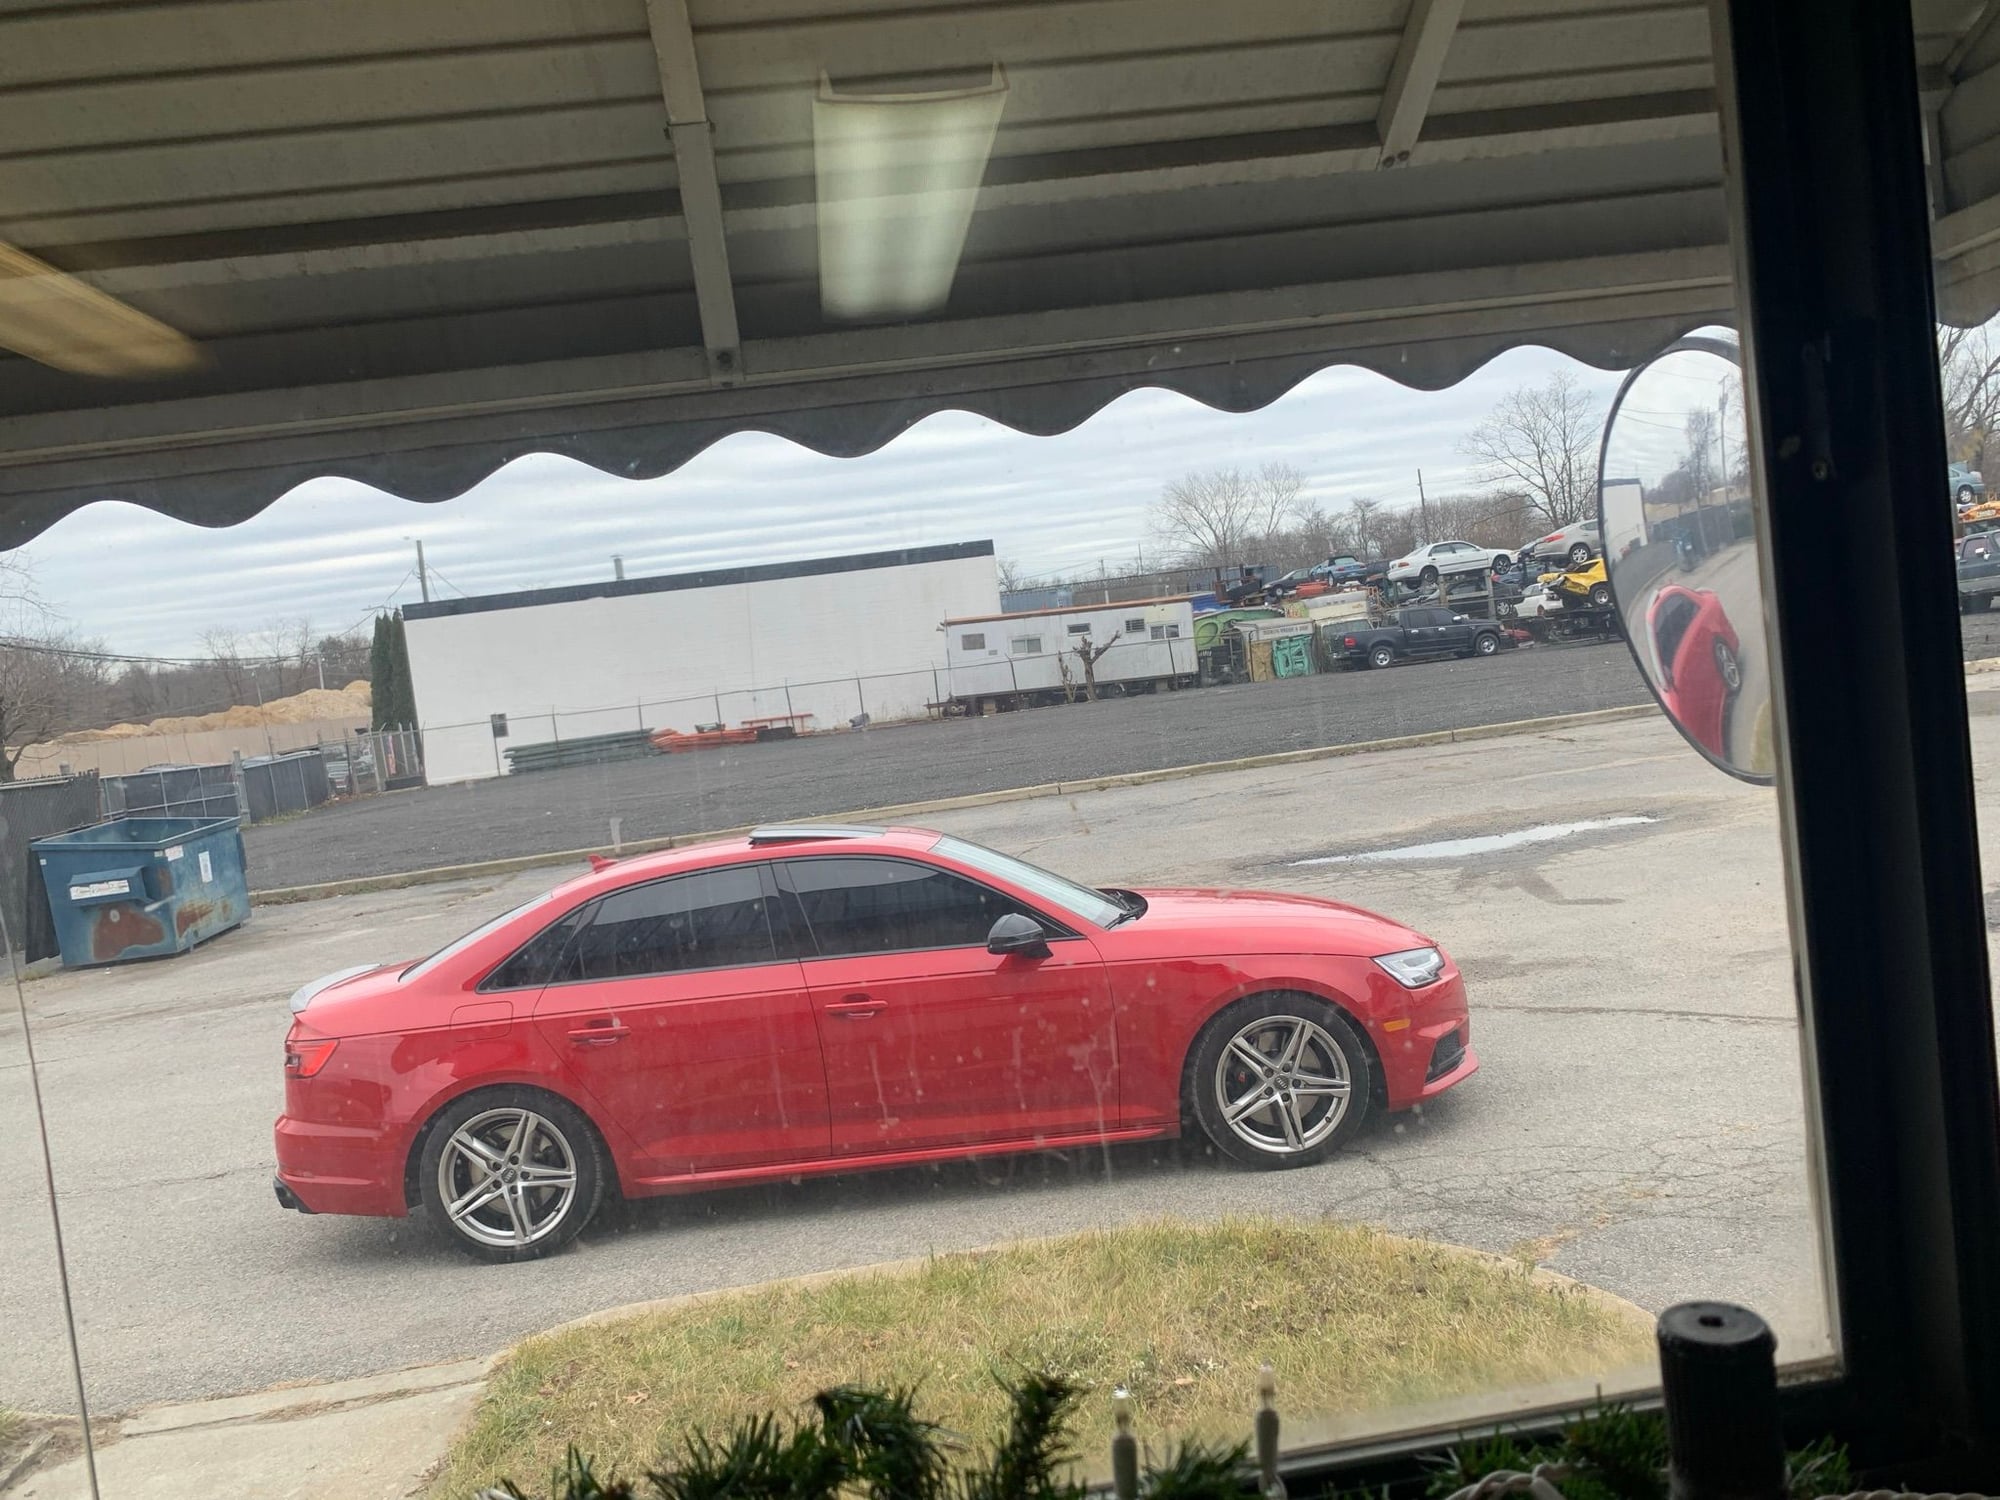 Wheels and Tires/Axles - OEM 18in b9 S4 wheels and tires - Used - 2018 to 2019 Audi S4 - Seaford, NY 11771, United States